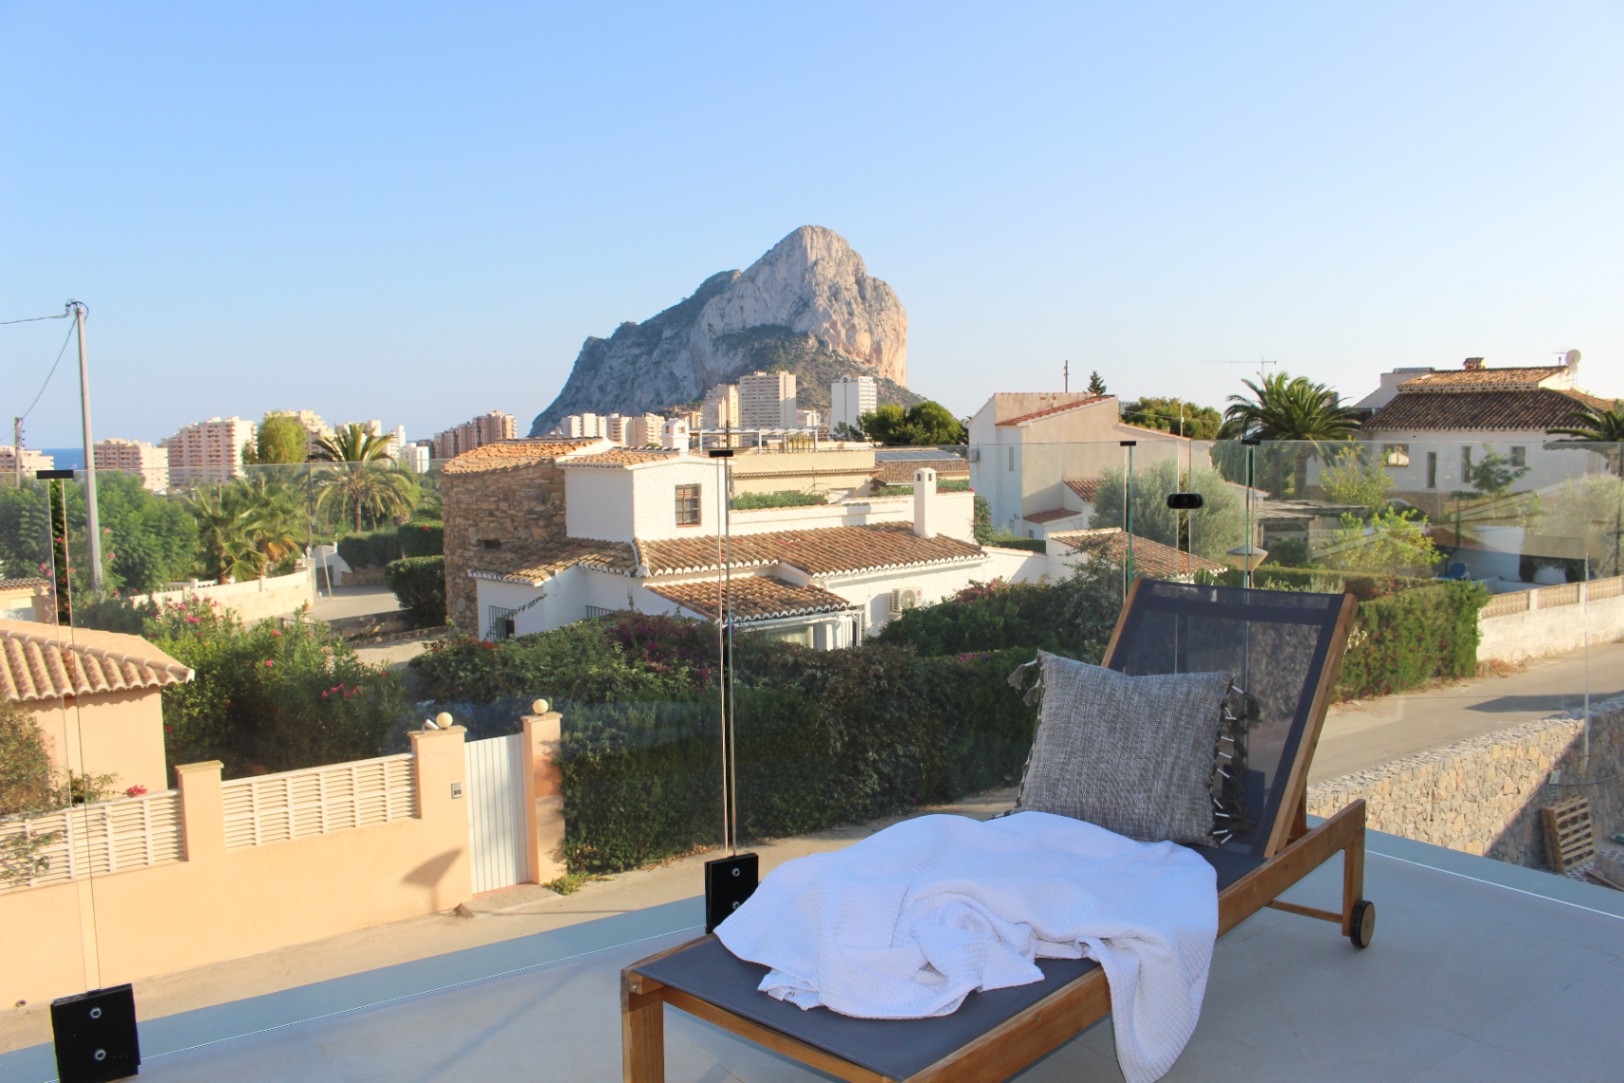 Photogallery - 36 - Exceptional homes in the Costa Blanca. Unparalleled Service. Exceptional properties in the Costa Blanca